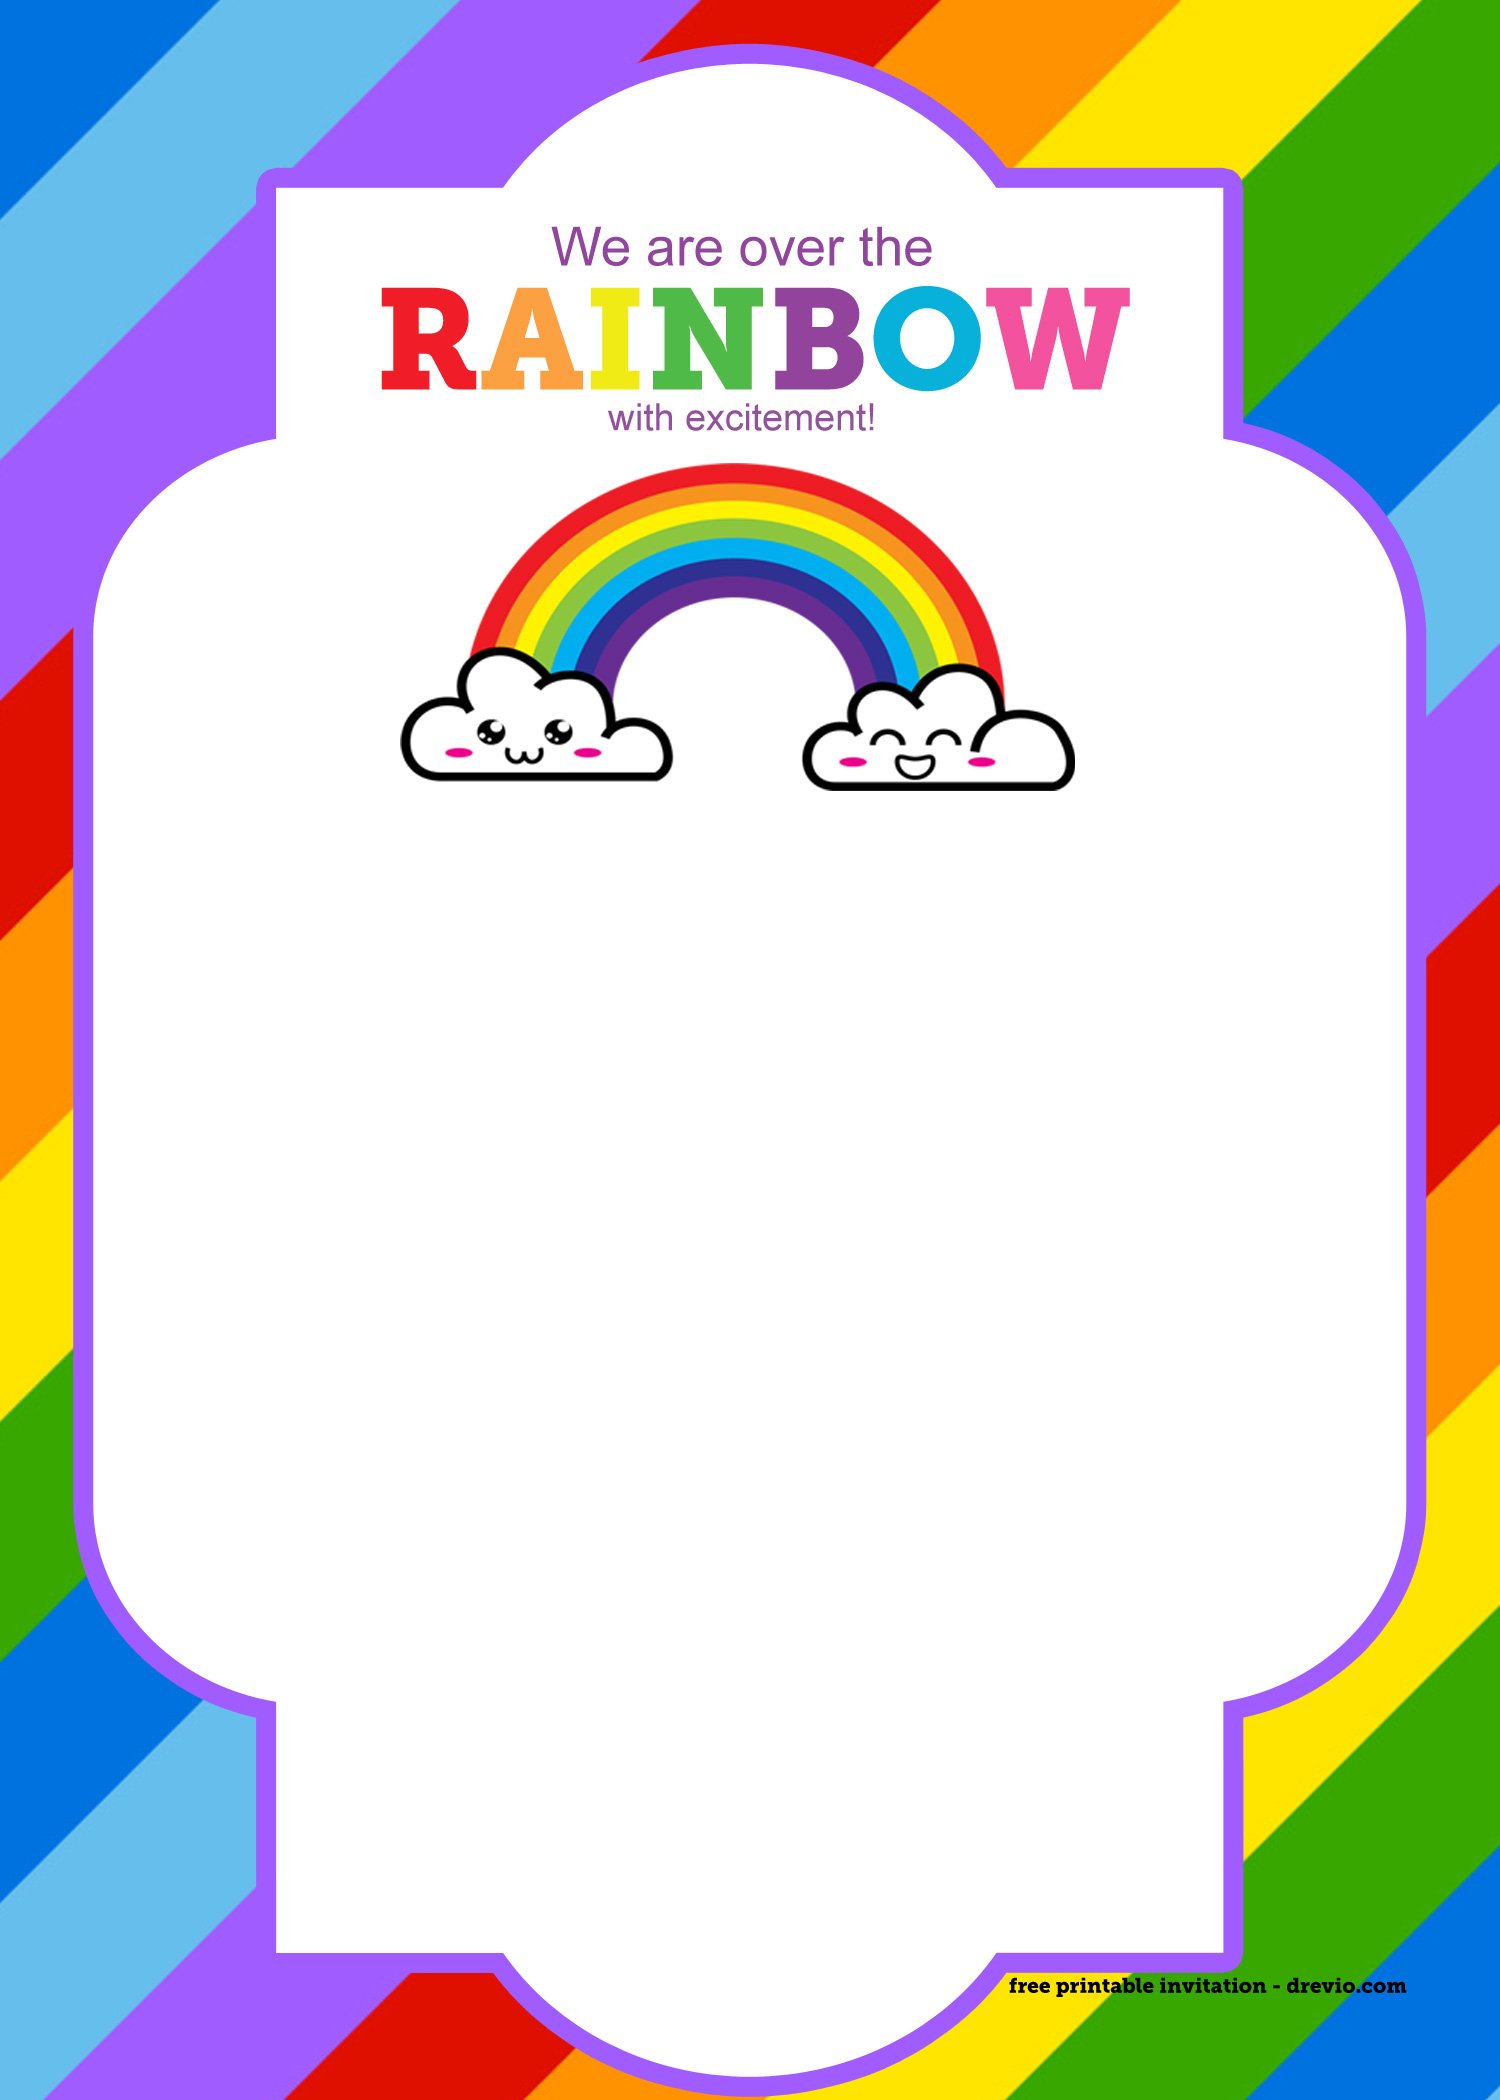 FREE Printable Rainbow Invitation Template + Thank You Card | Download